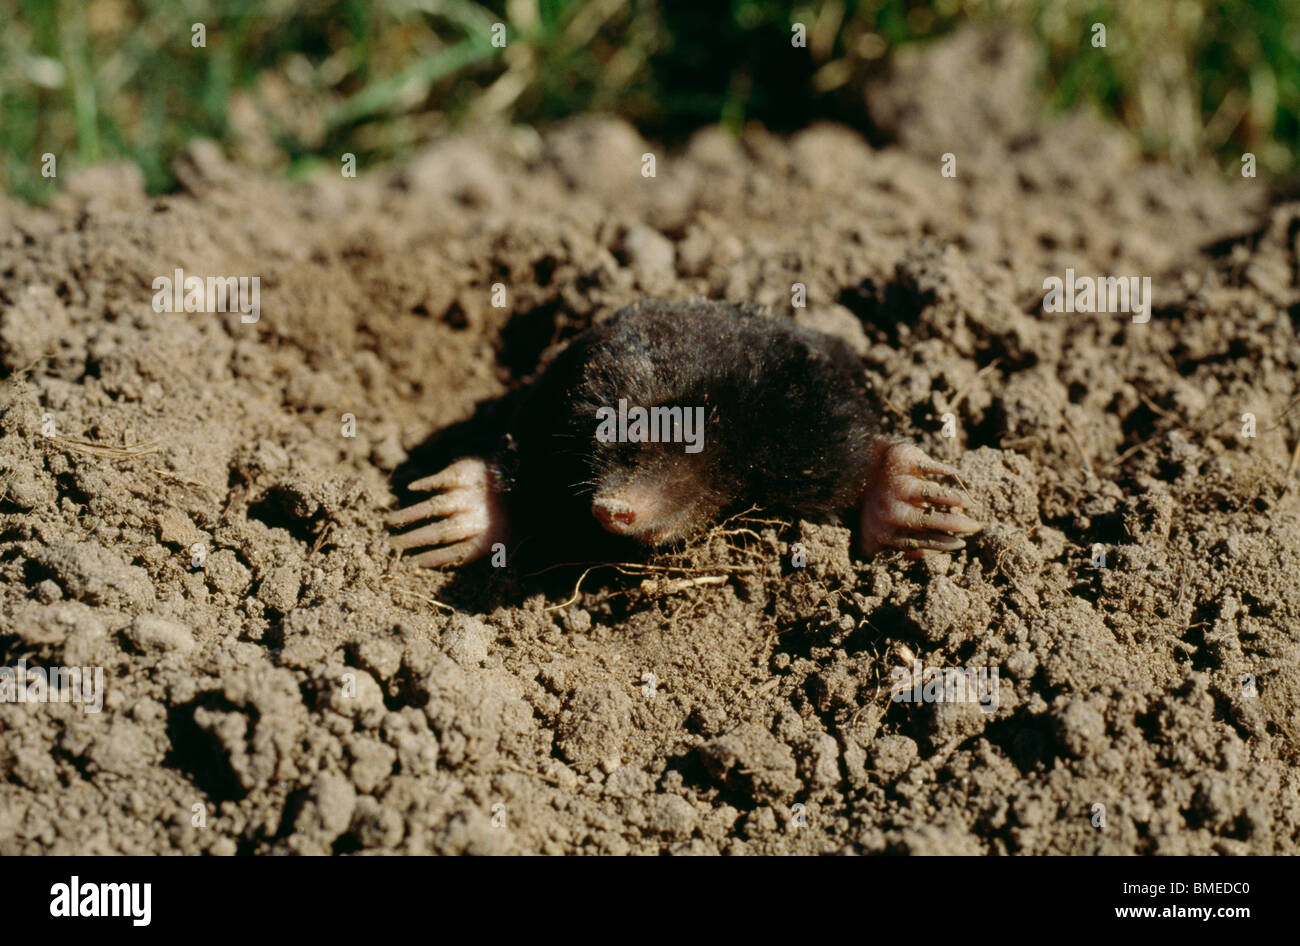 A mole peeping out of a hole in the ground Stock Photo